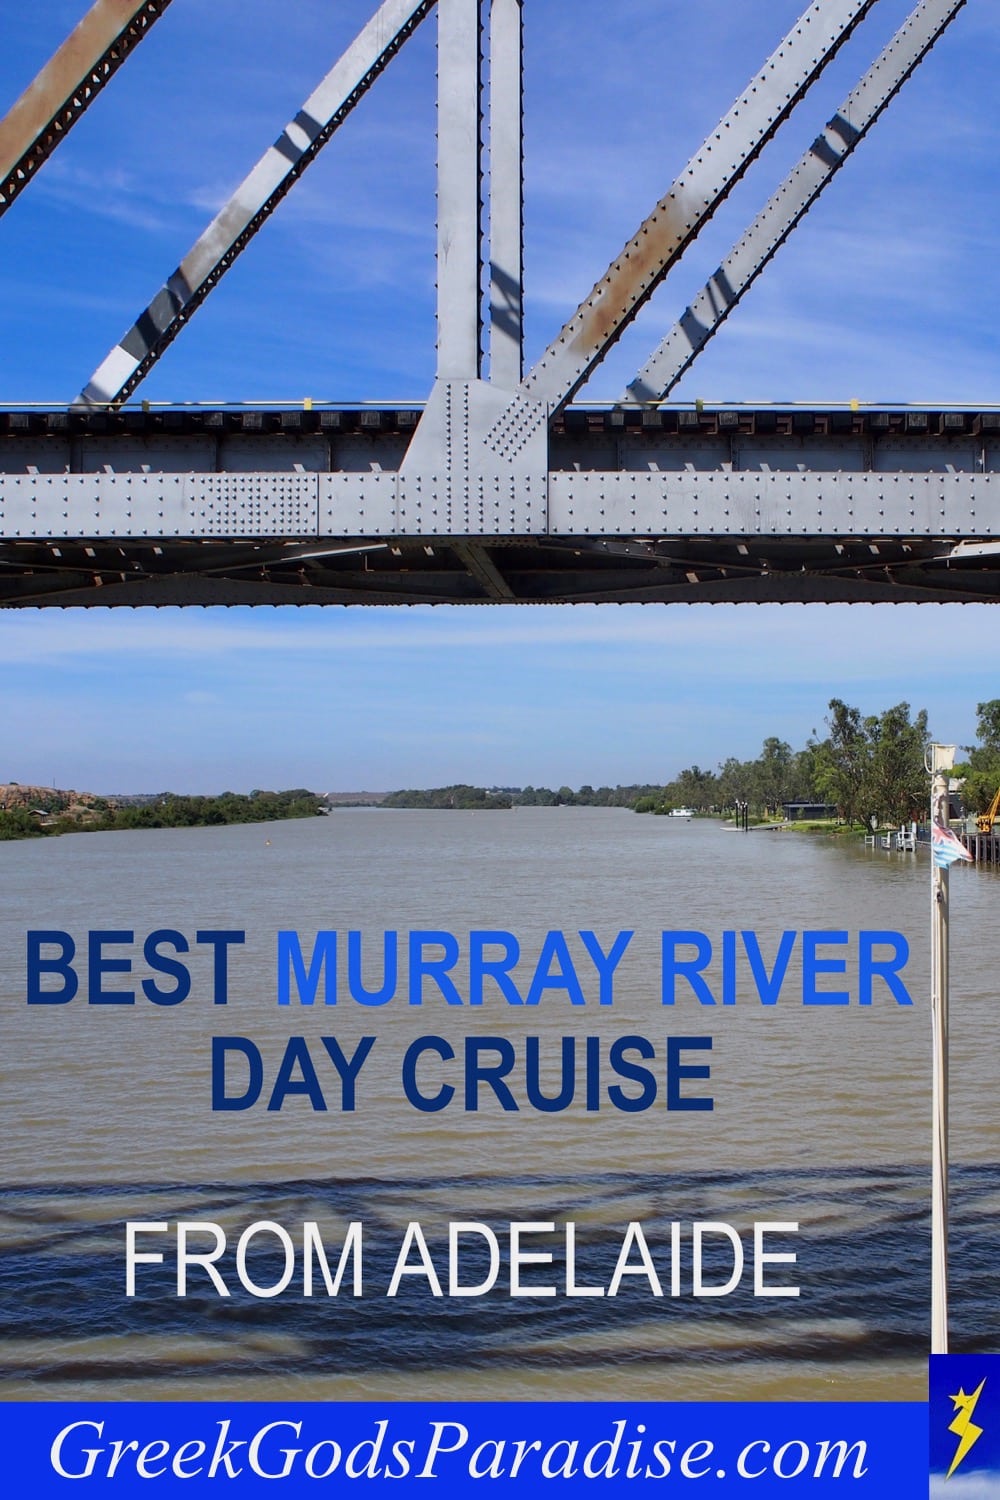 Best Murray River Day Cruise from Adelaide